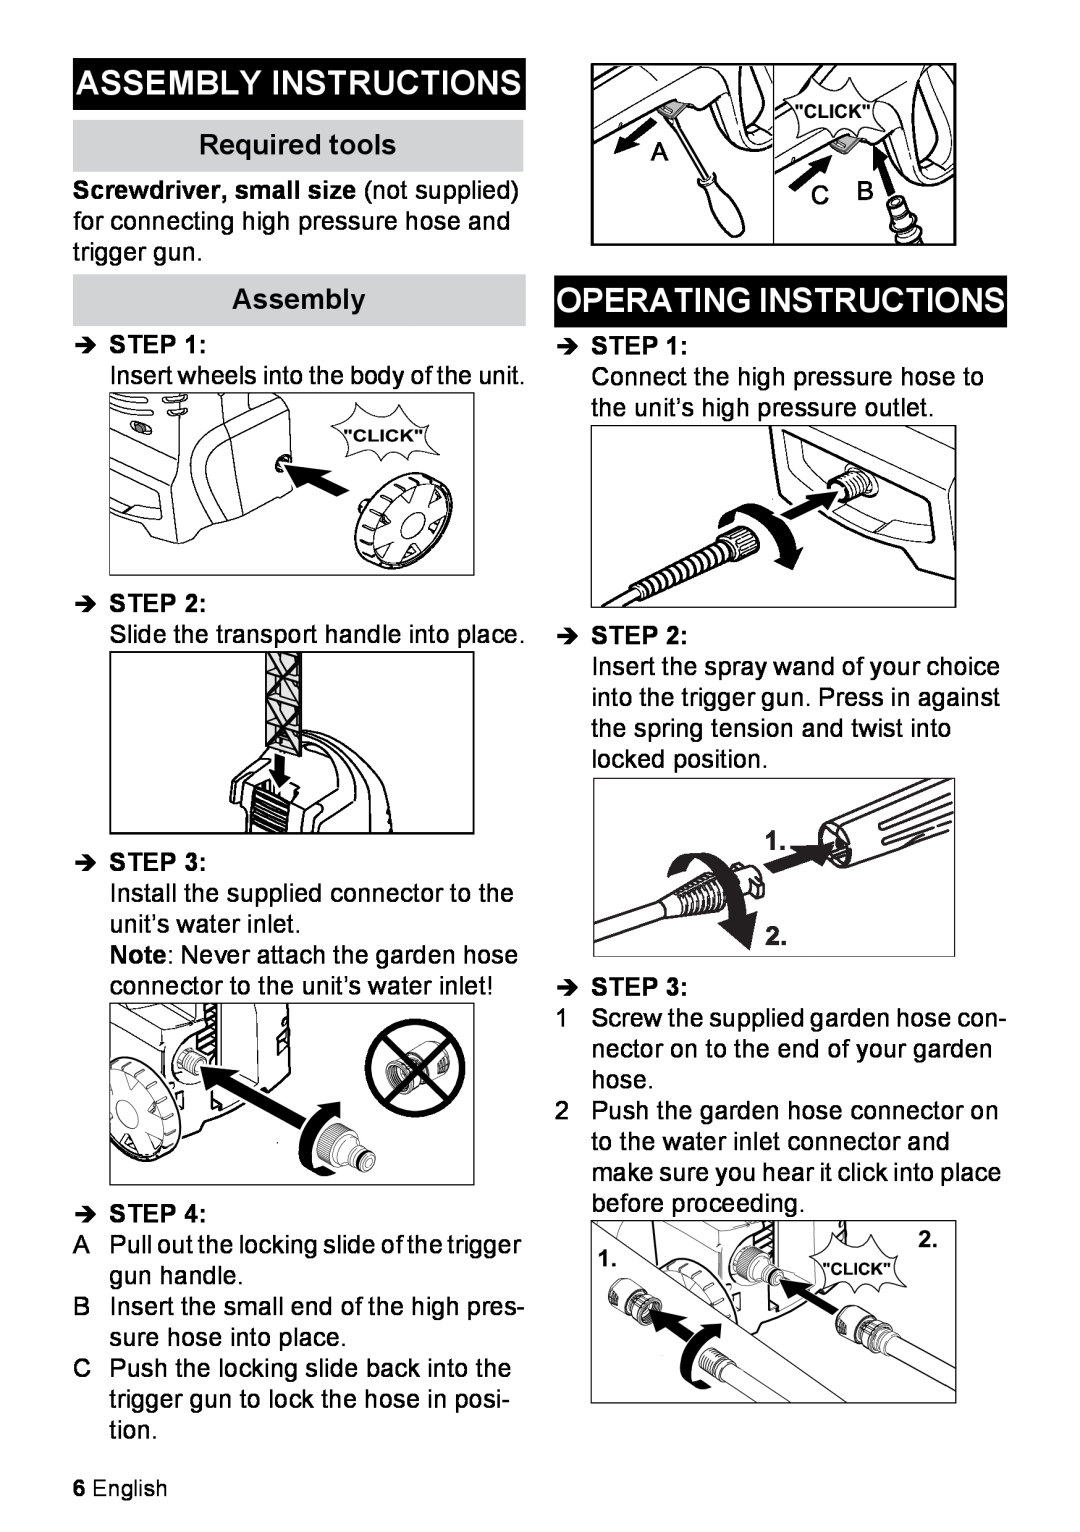 Karcher K 2.27 manual Assembly Instructions, Operating Instructions, Required tools,  Step 